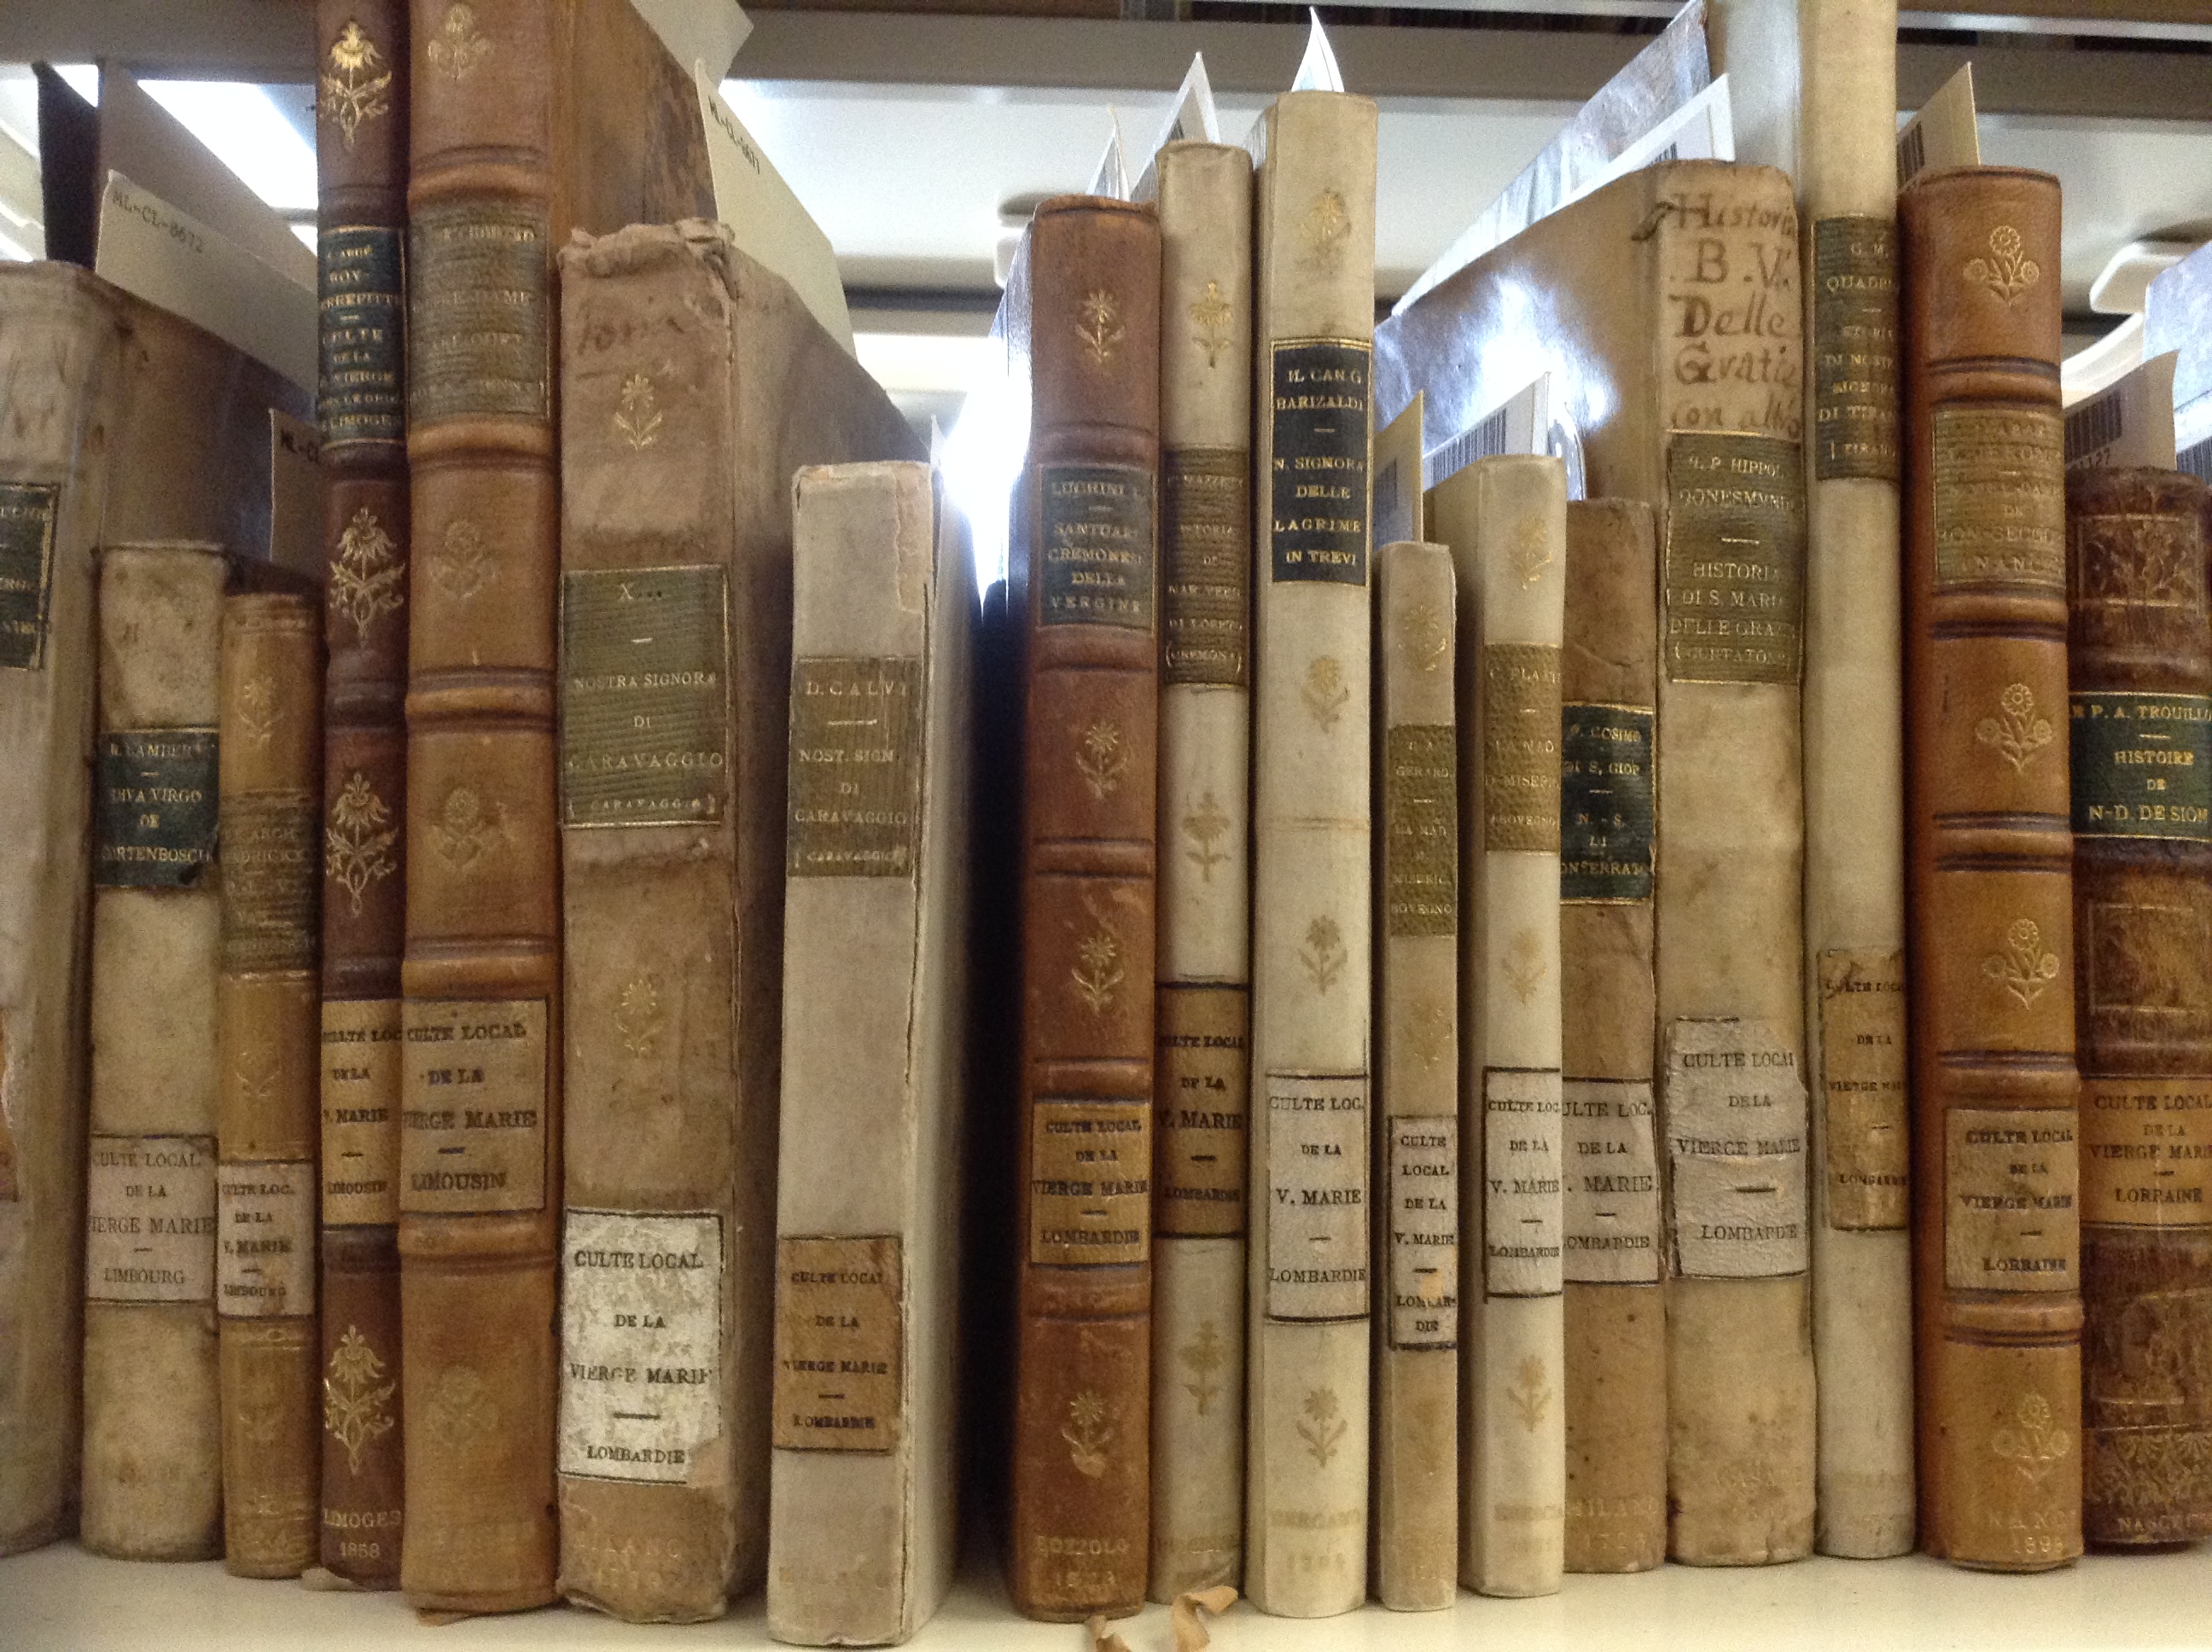 Rare book bindings from the Clugnet collection, Marian Library.